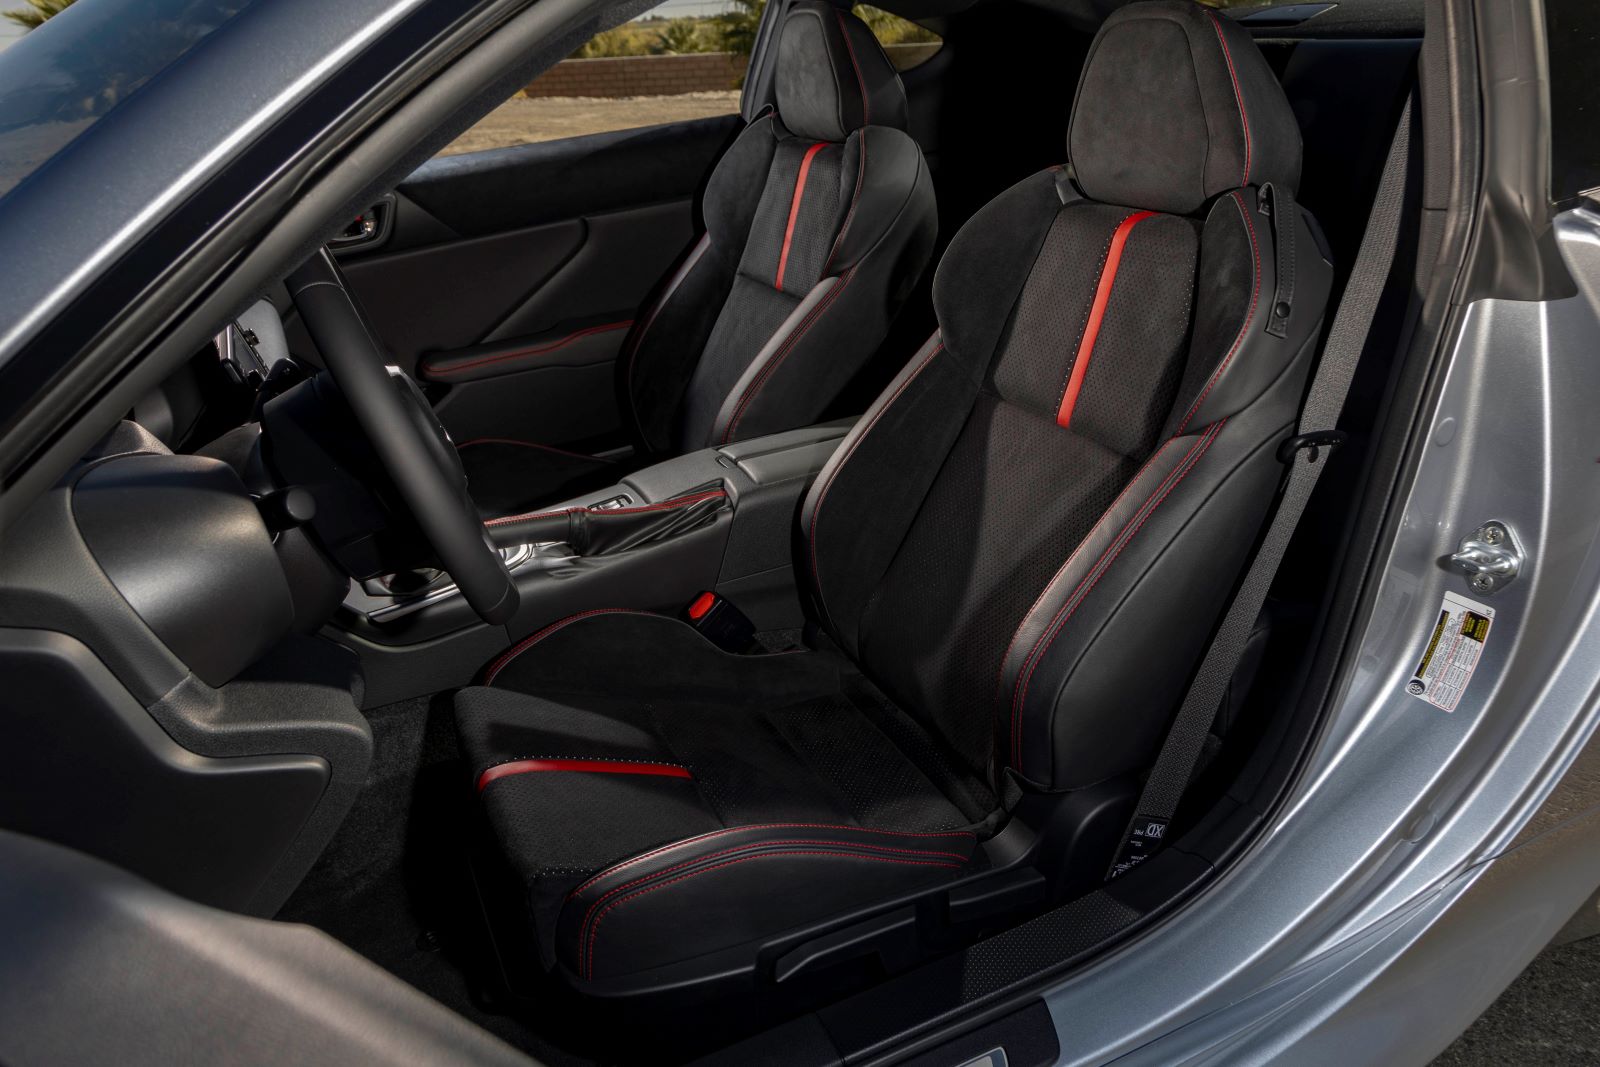 Interior shot of the 2022 Subaru BRZ Limited trim level, with black leather and faux suede upholstery trim